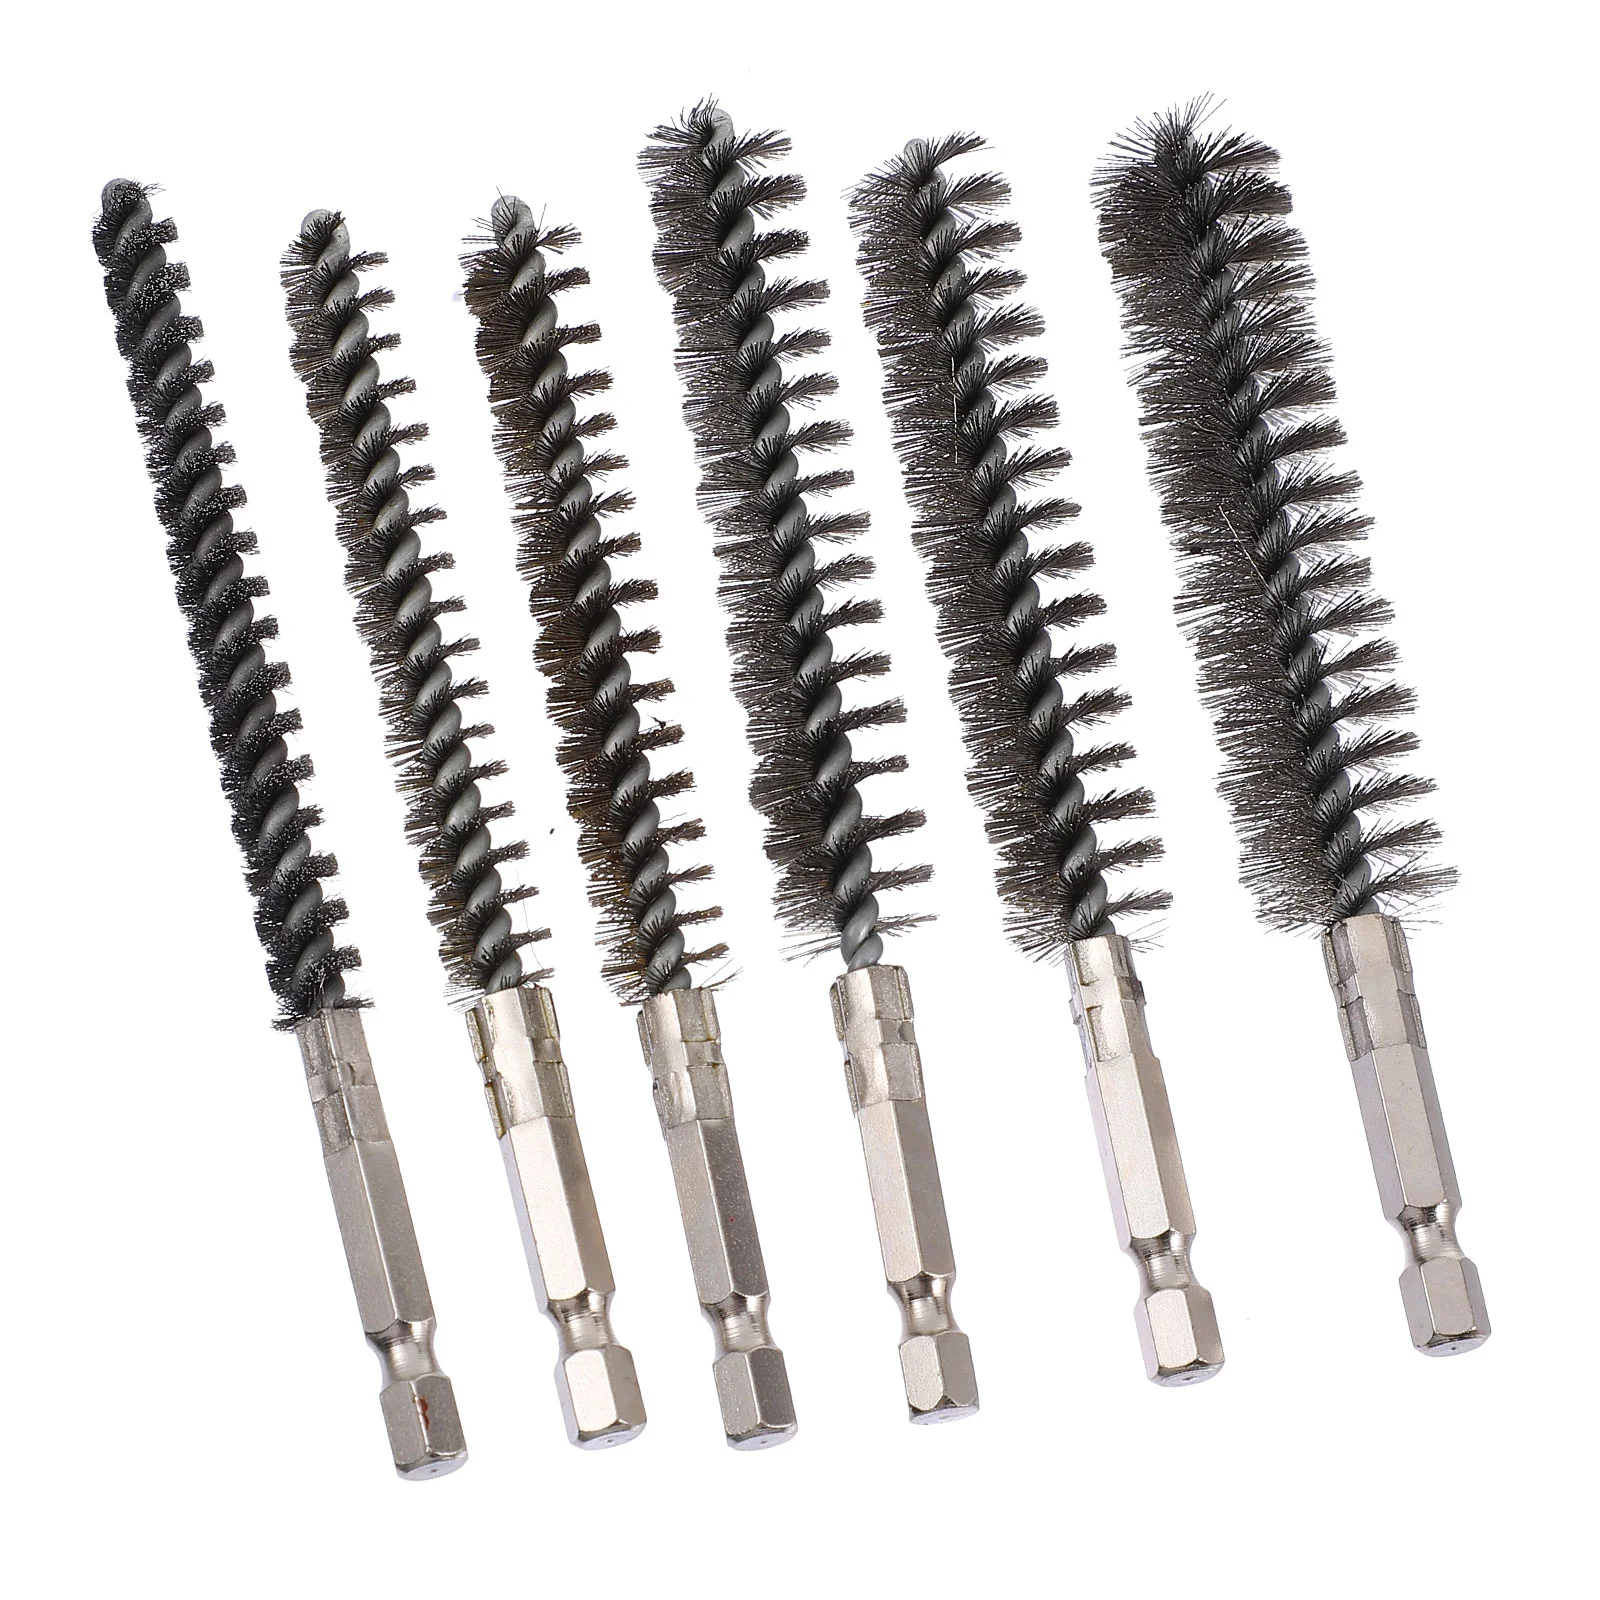 

6pcs Wire Brush Drill Bore Cleaning Brush Set with Hex Shanks Stainless Steel Wire Twisted Brush For Drill Impact Driver